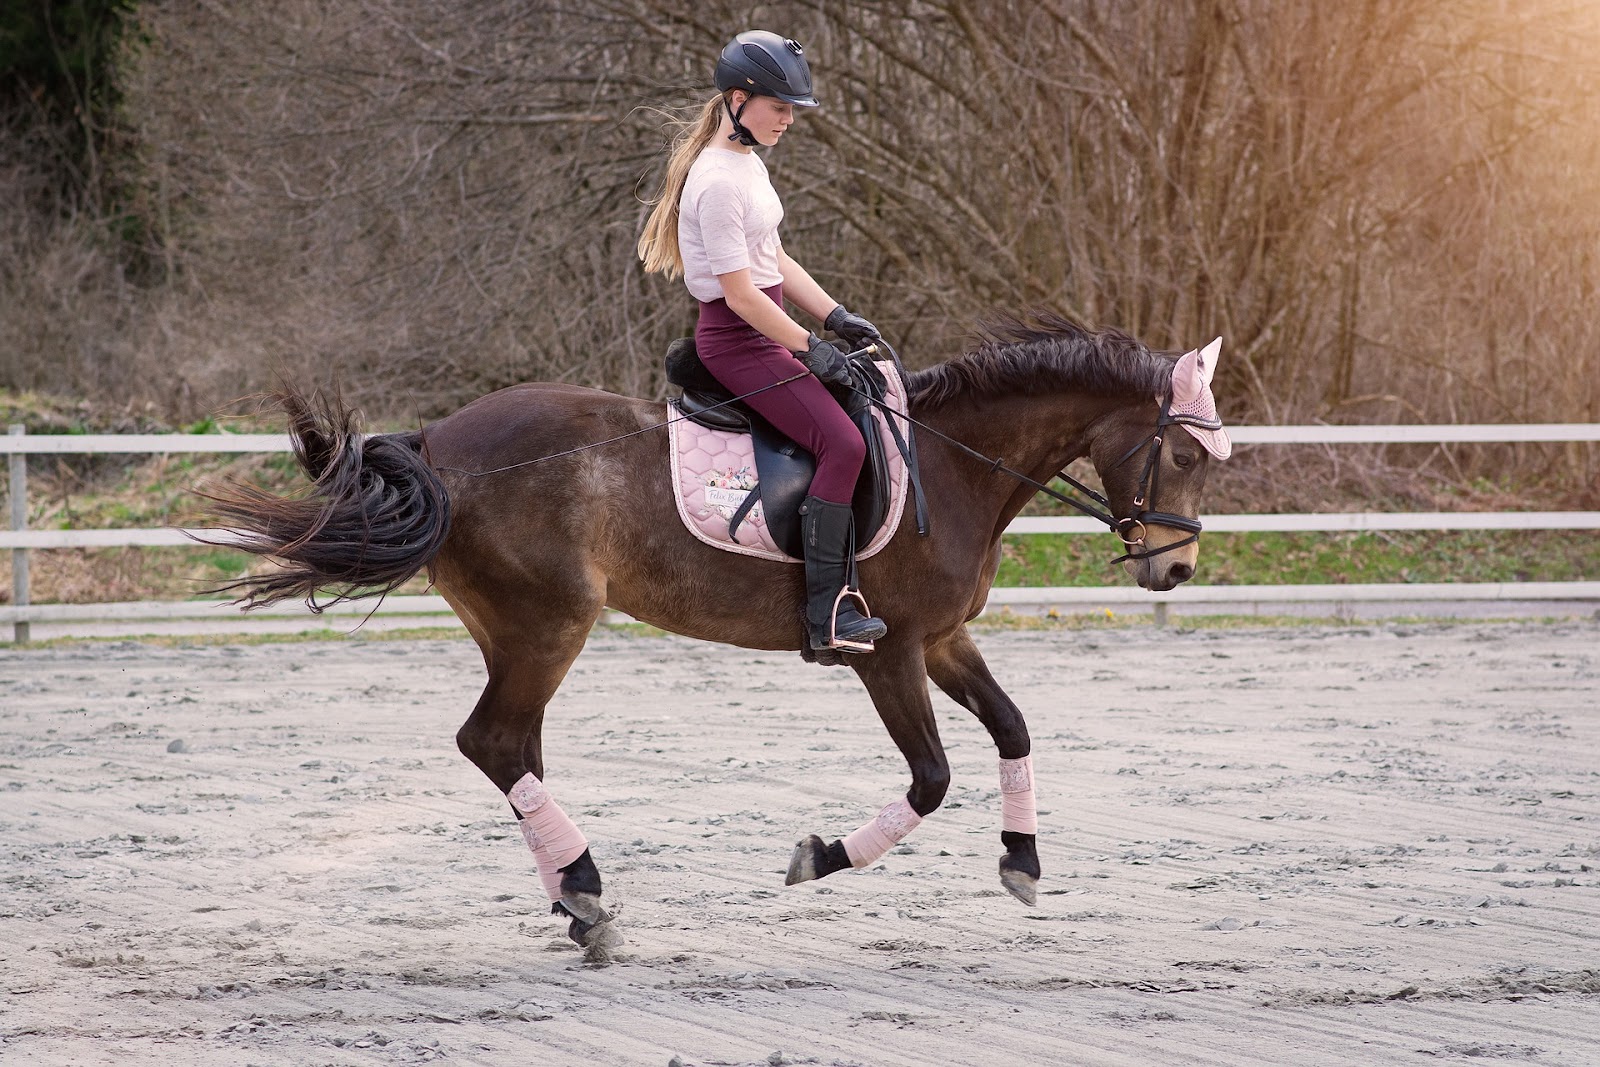 female rider with pink saddle pad performs a flying lead change